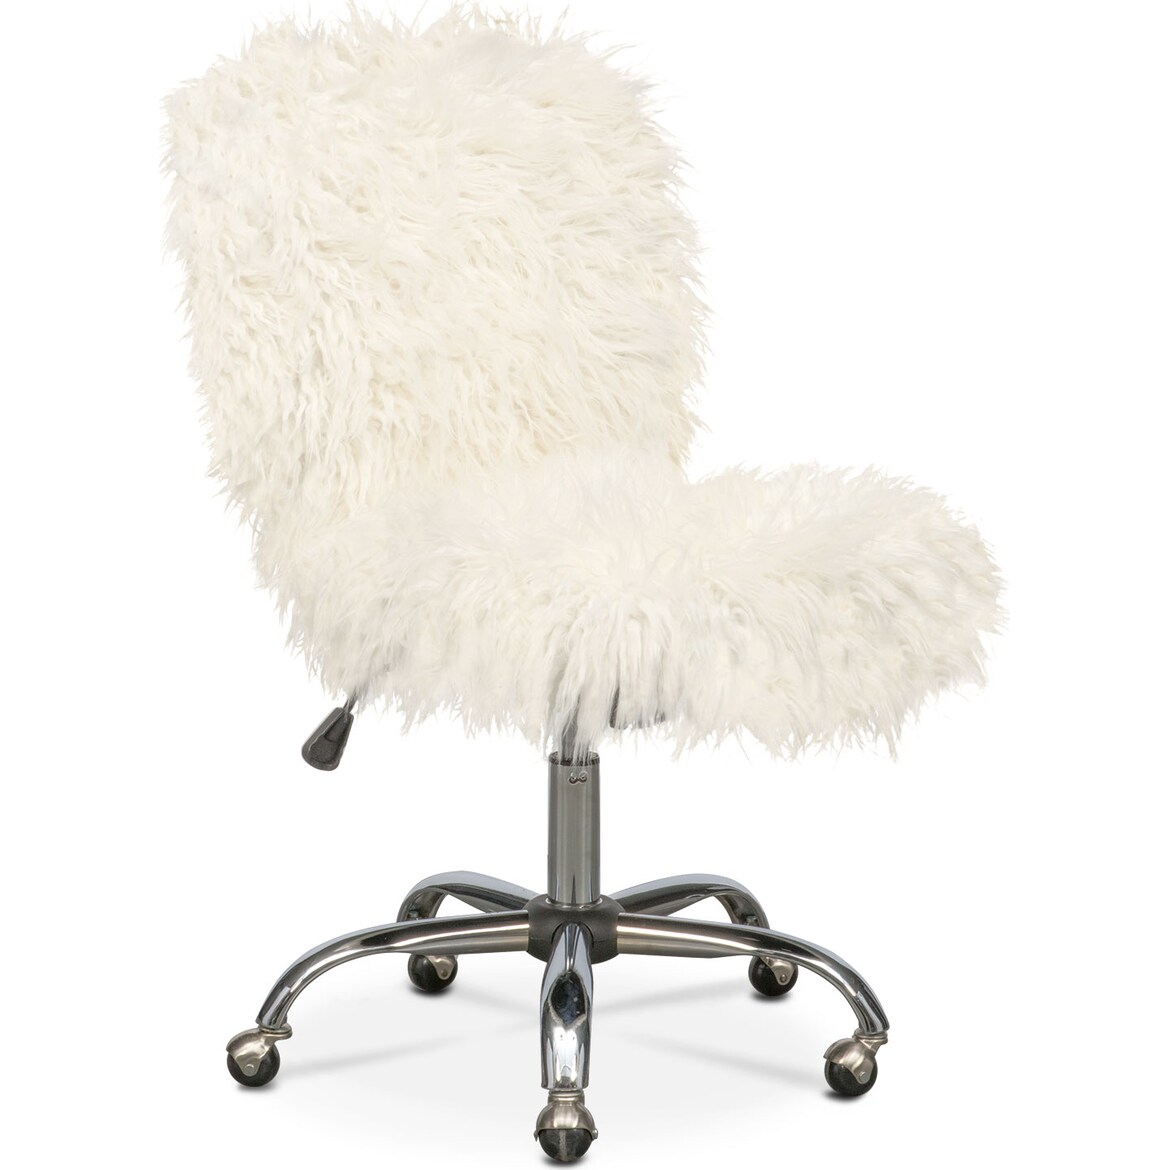 Frenzy Faux Fur Office Chair Value City Furniture and